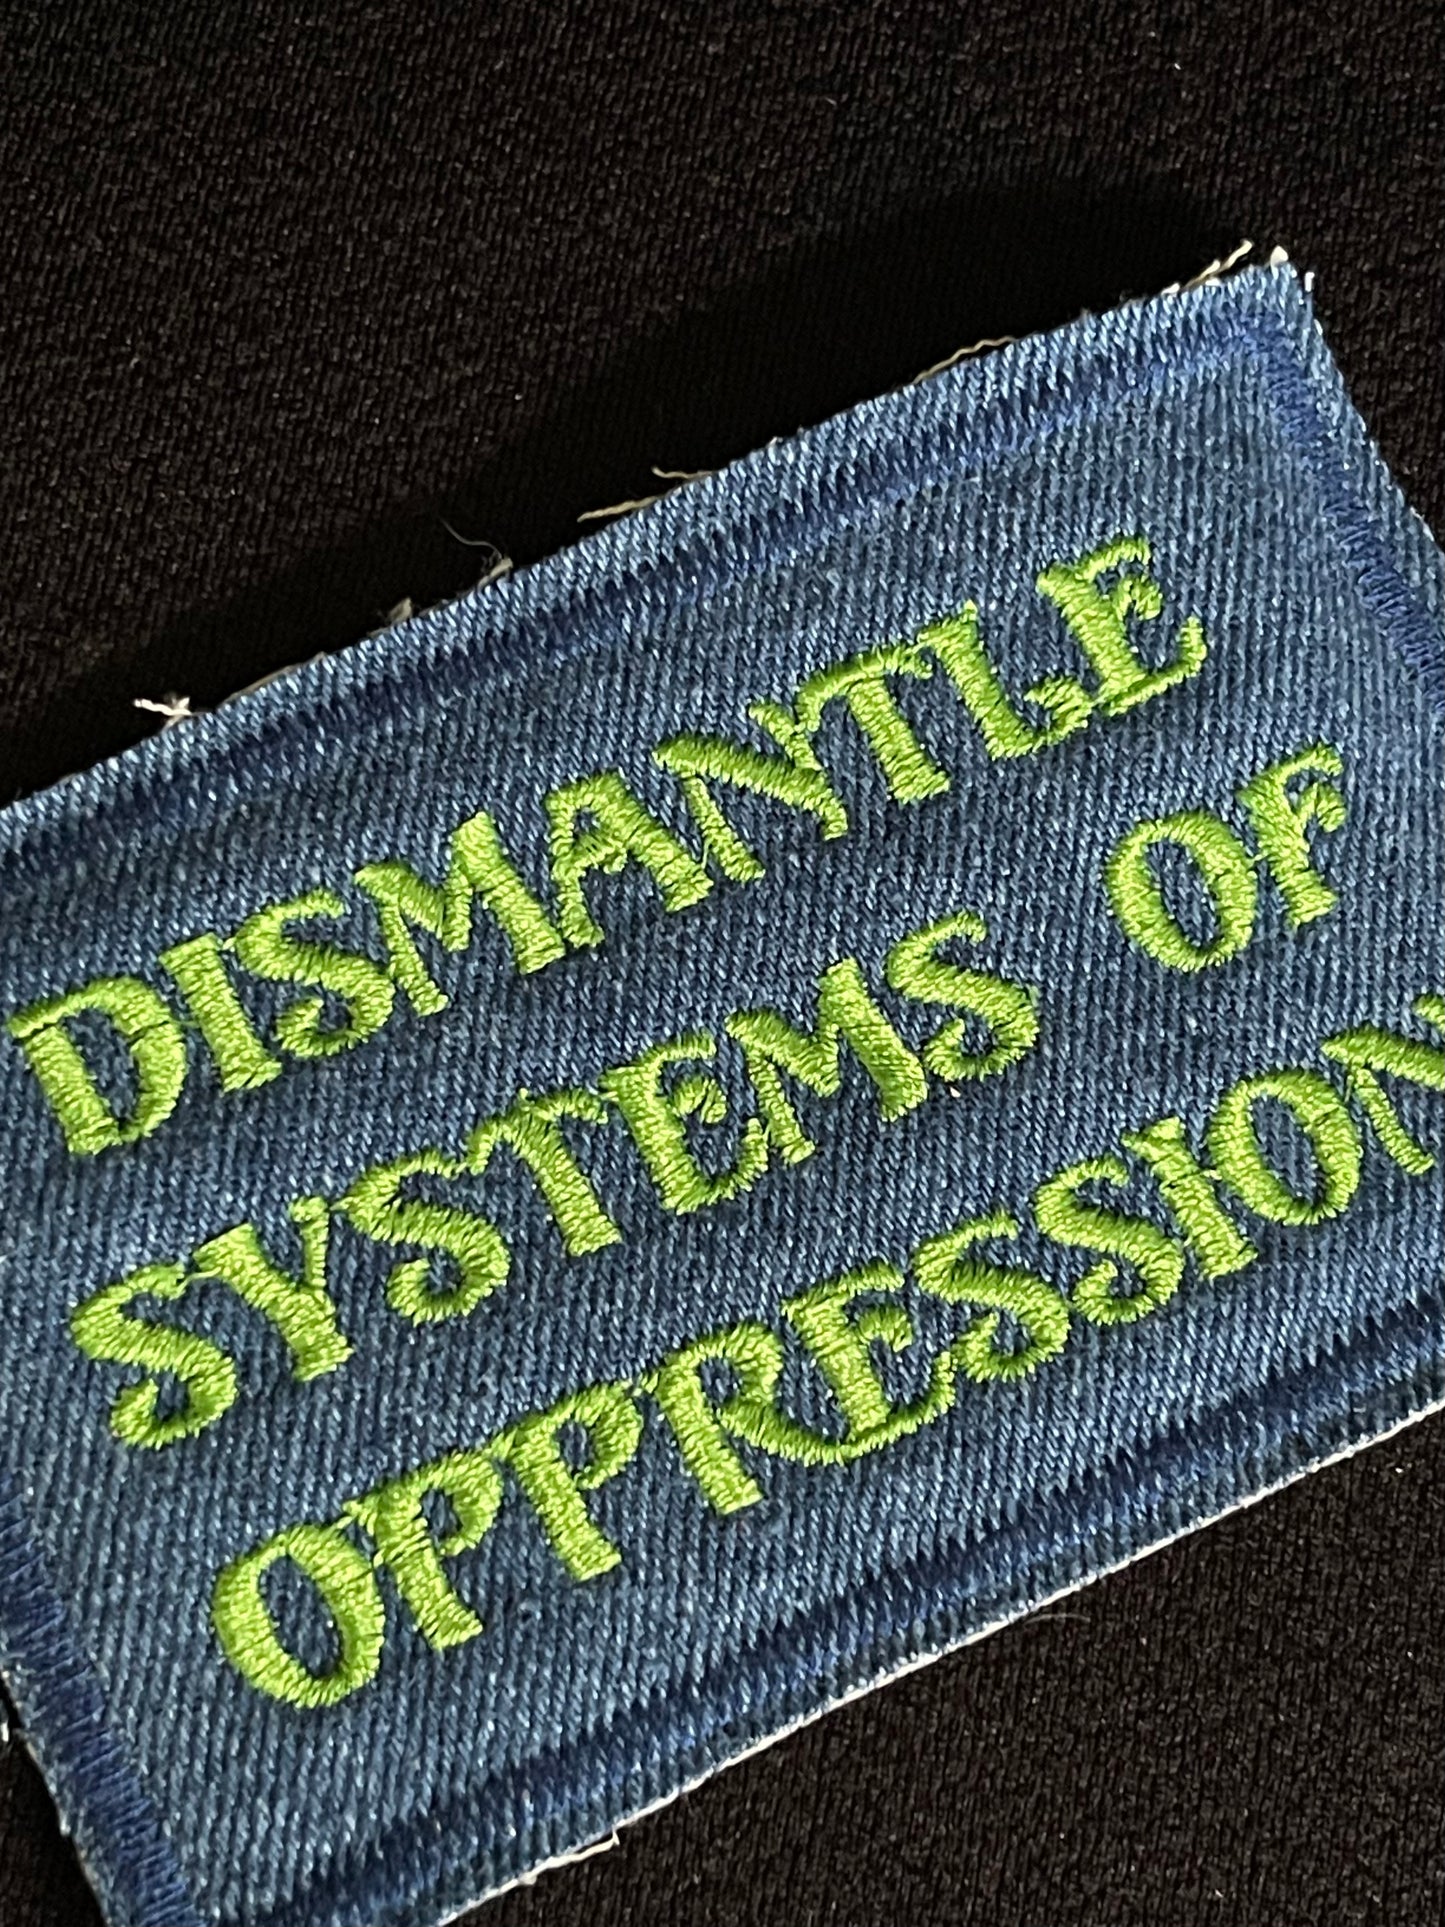 Dismantle Systems of Oppression Patch